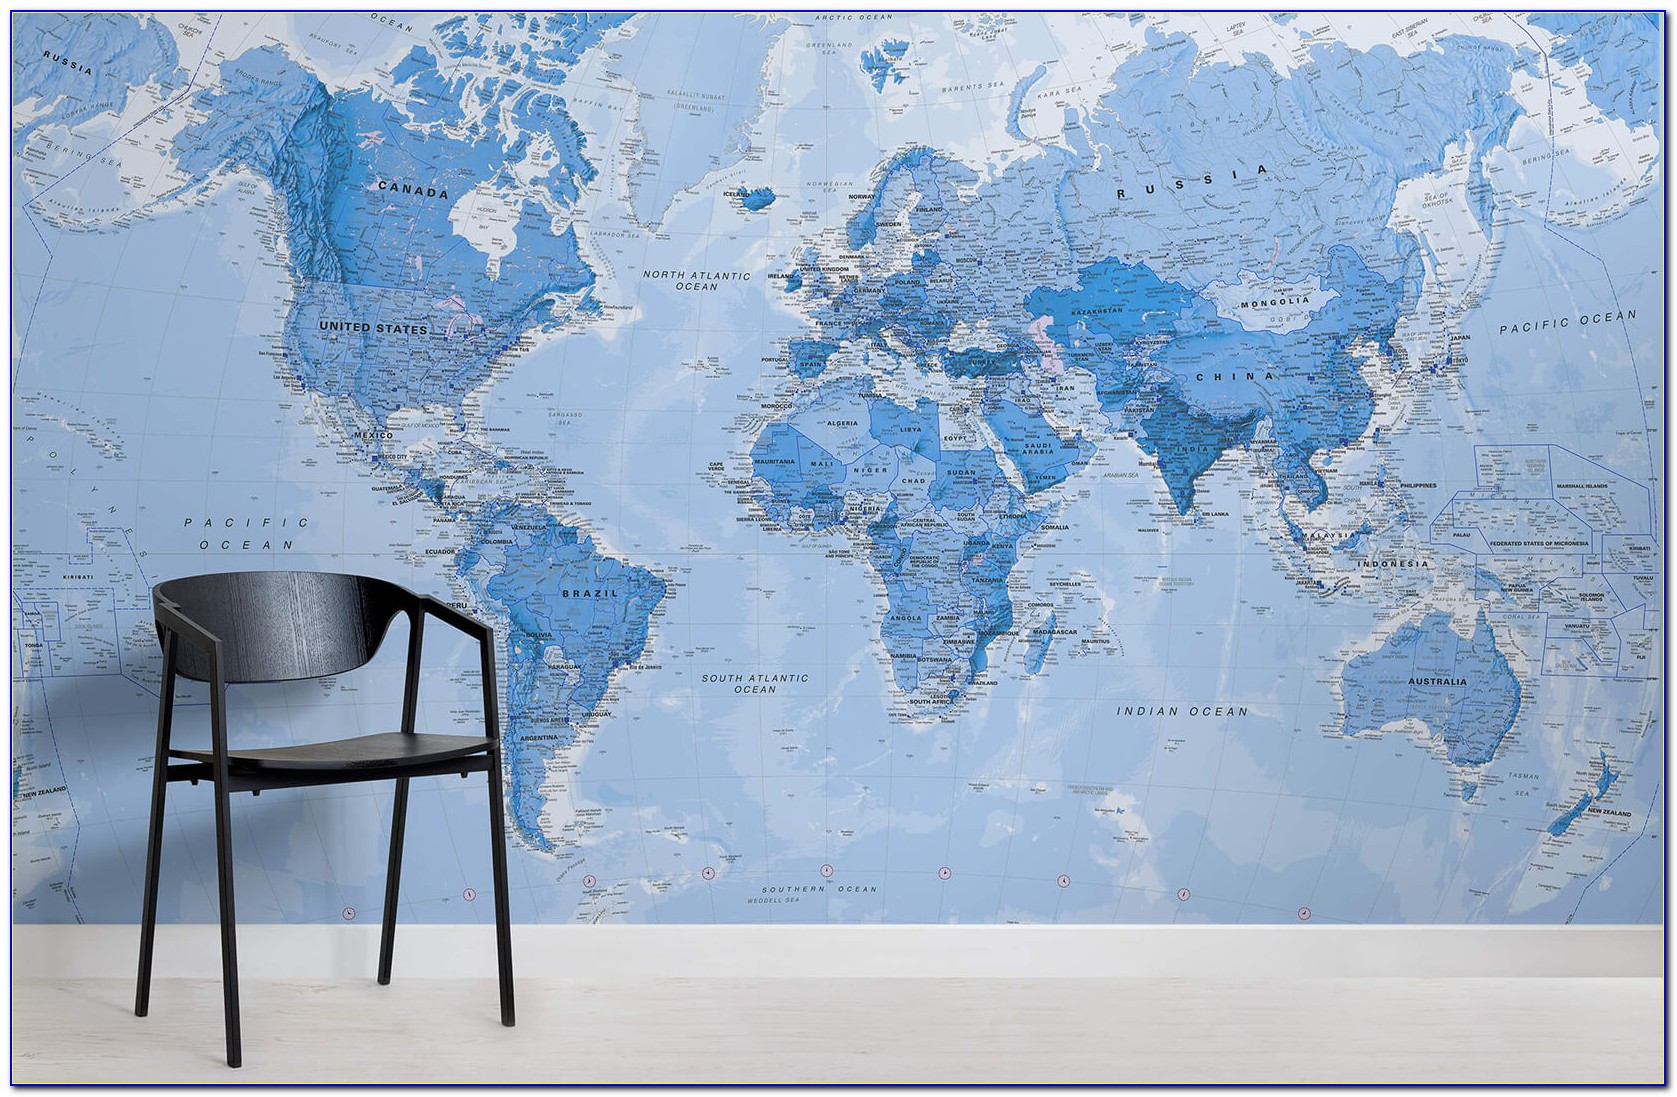 Vintage World Map Wallpaper Mural - Pink Map Of The World - HD Wallpaper 